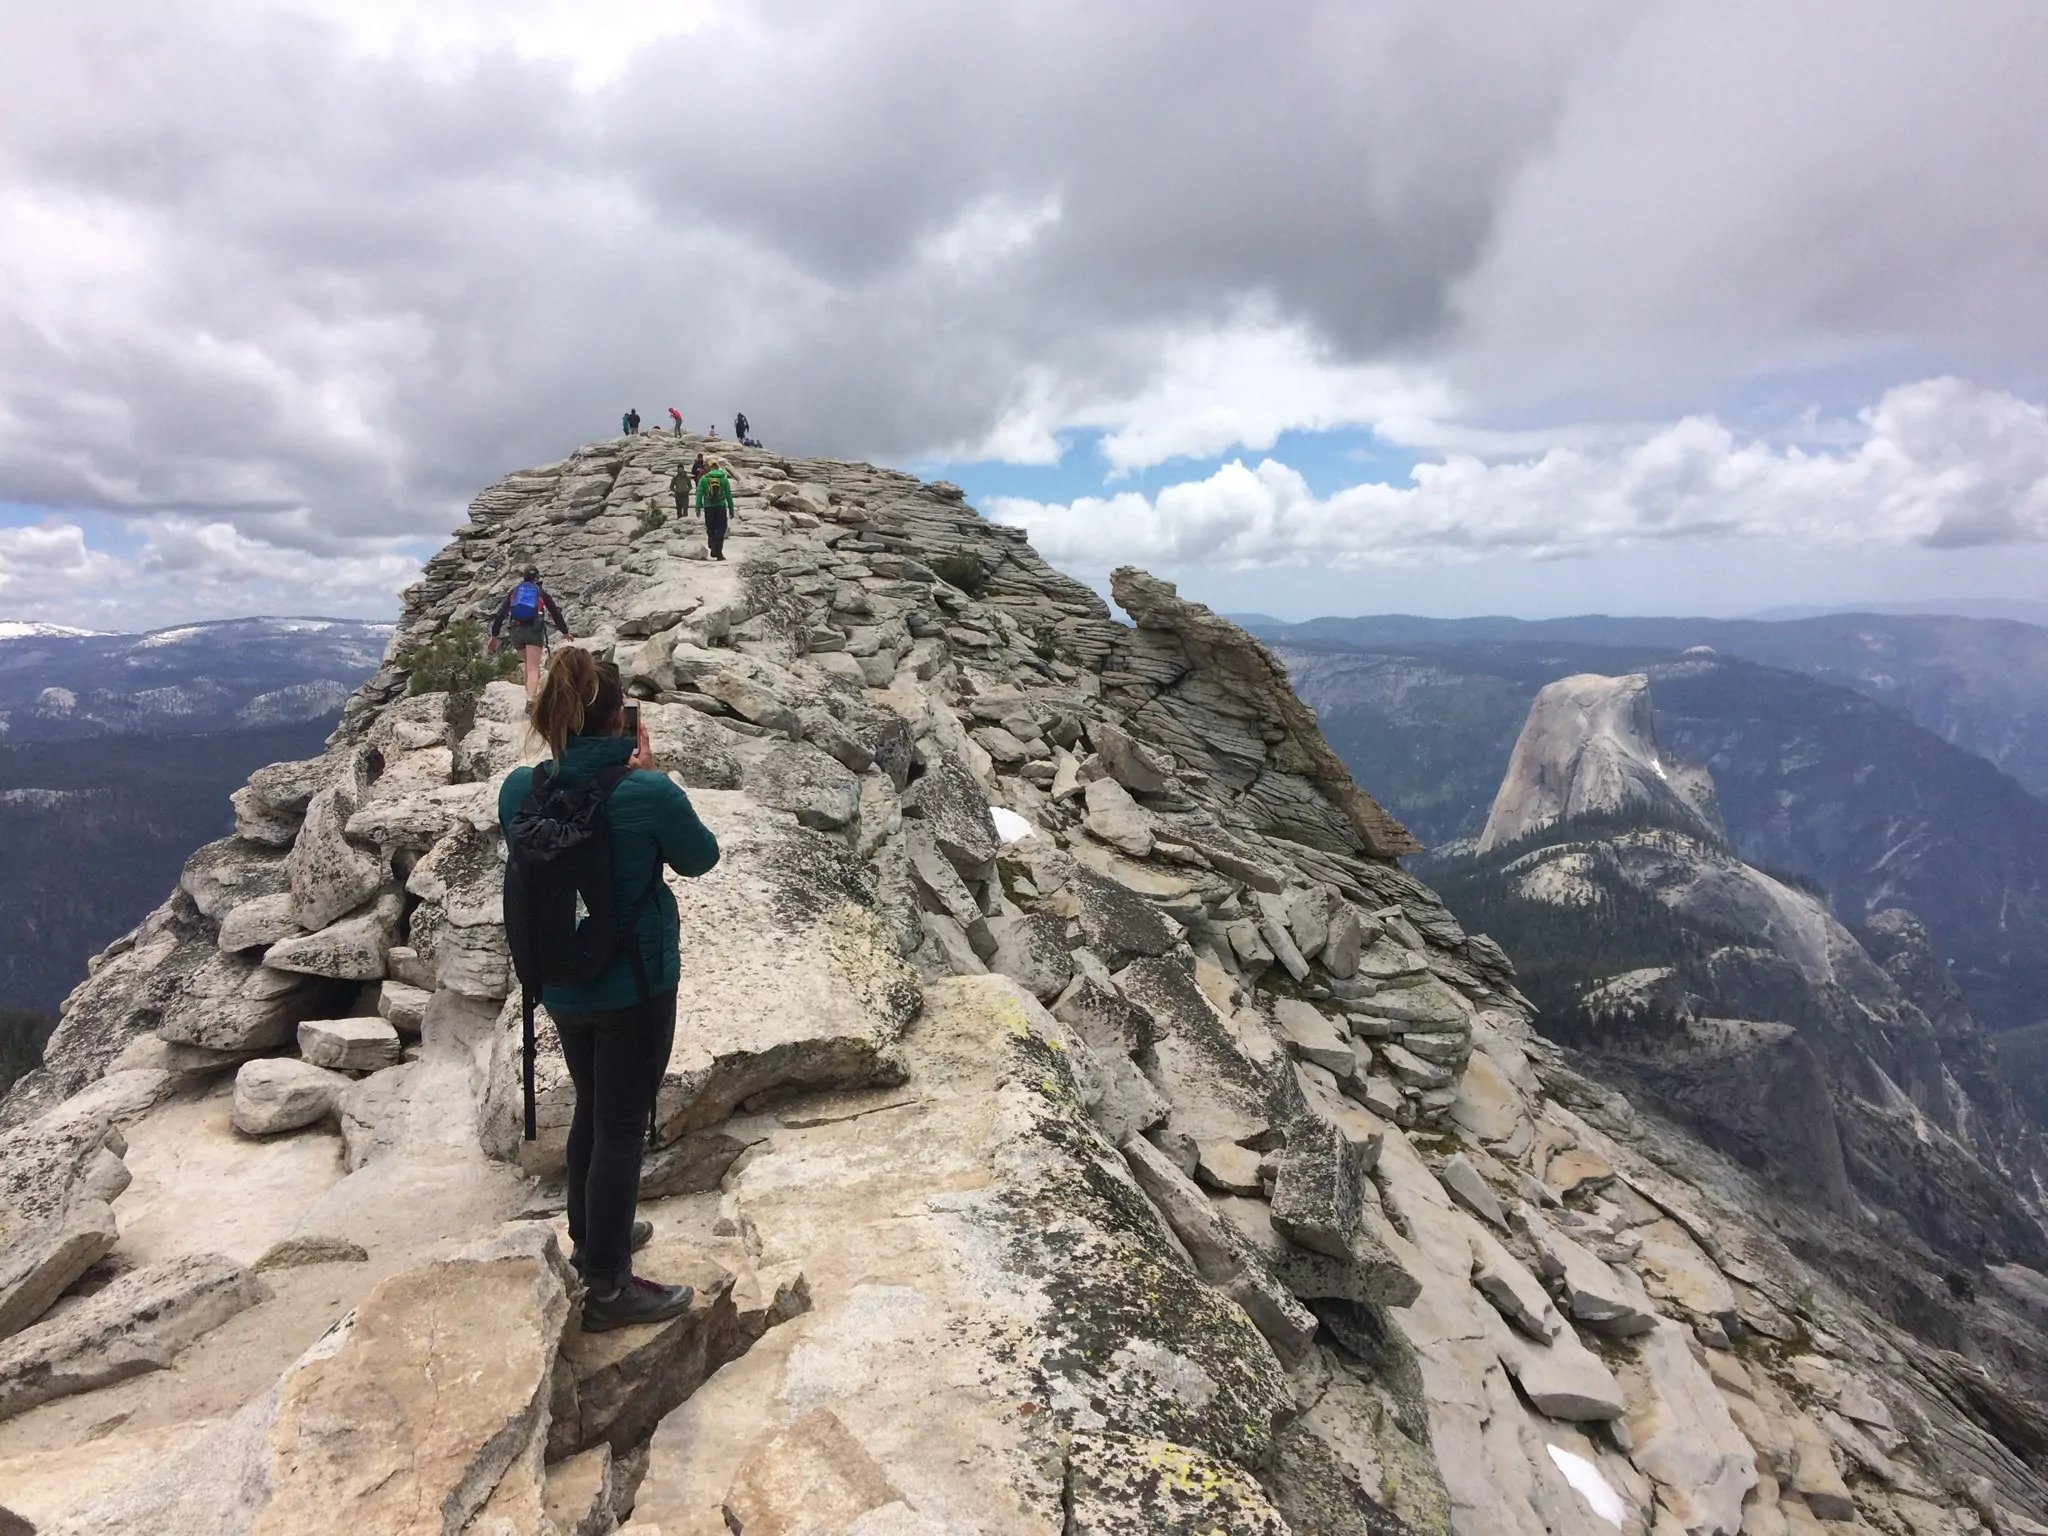 Hikers tackle the final push to the summit in Yosemite National Park